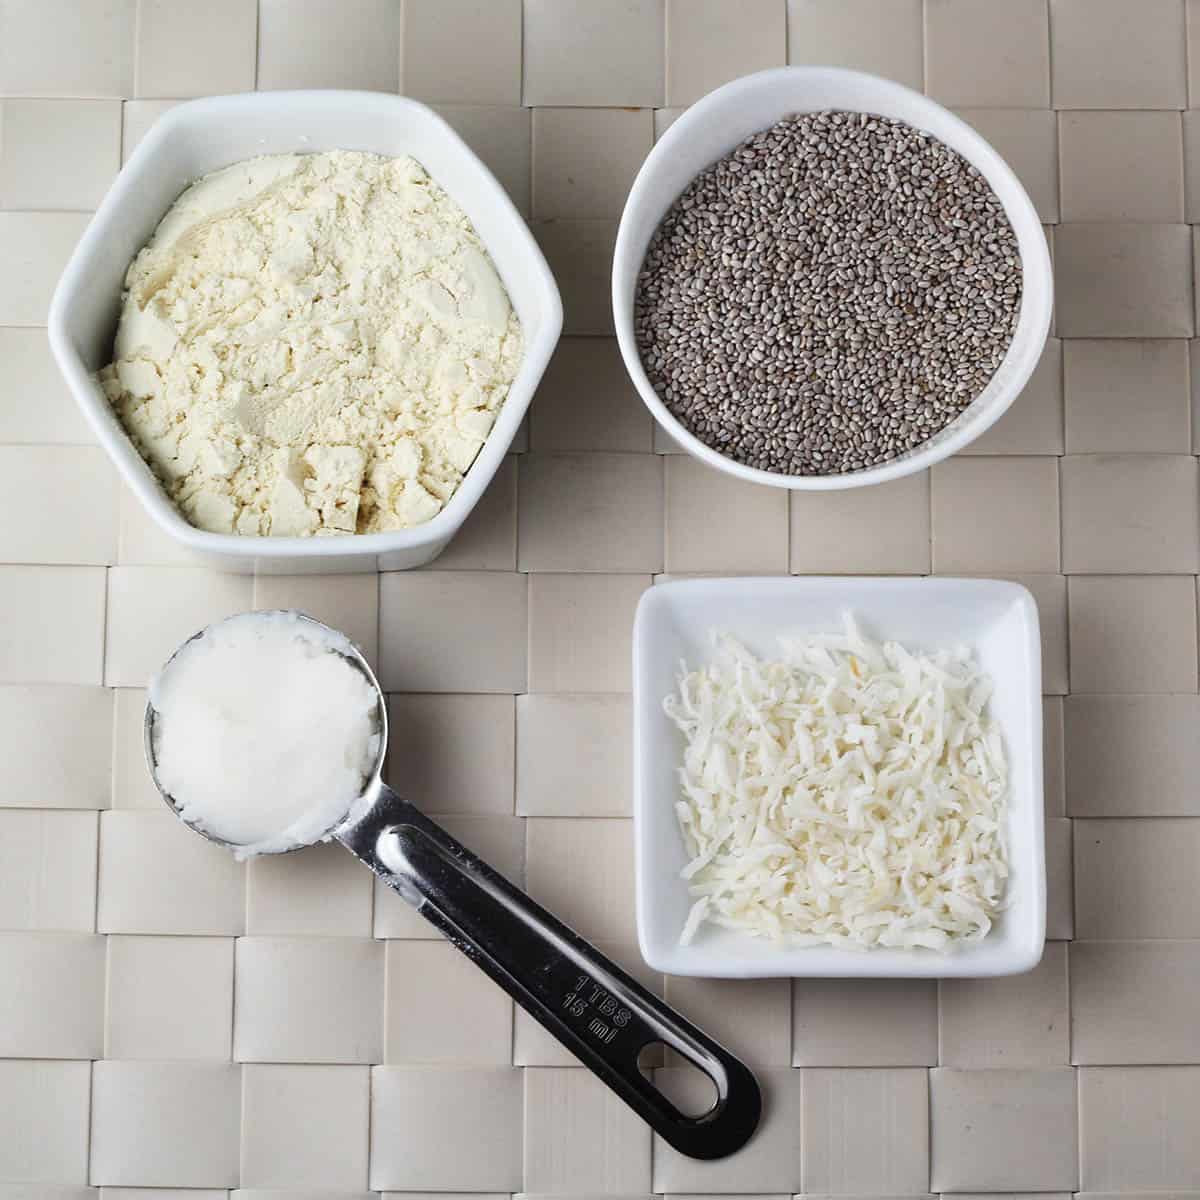 ingredients for coconut chia pudding: a tablespoon of coconut butter, a small dish of protein powder, a small dish of shredded coconut, and a small dish of chia seeds on a woven beige placemat